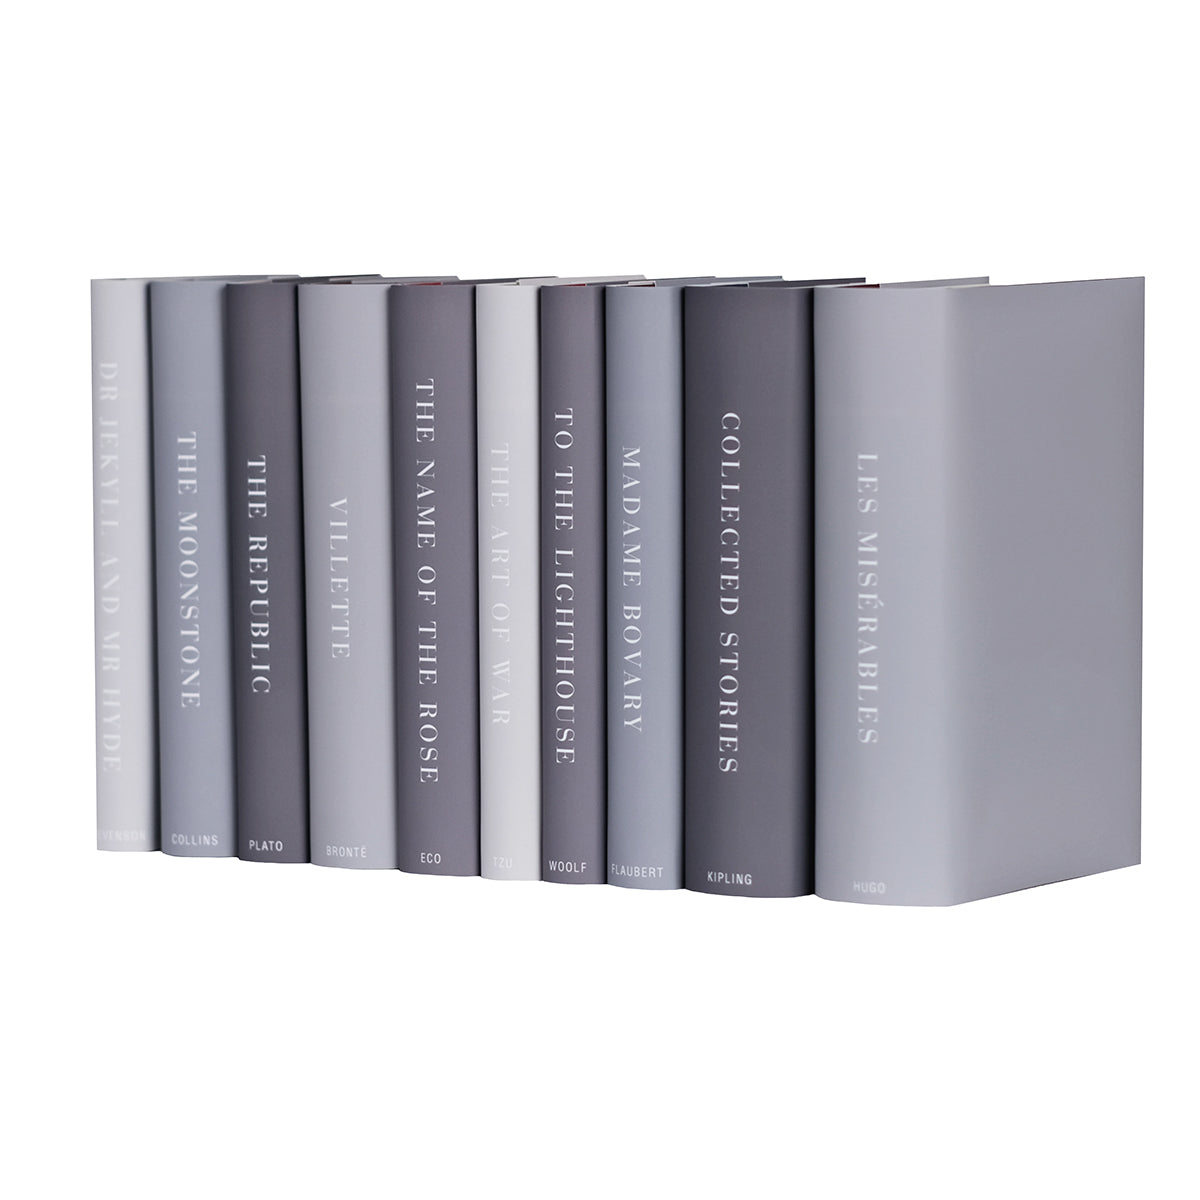 Everyman's Library Classics with Modern-Style Jackets in Sets of 10